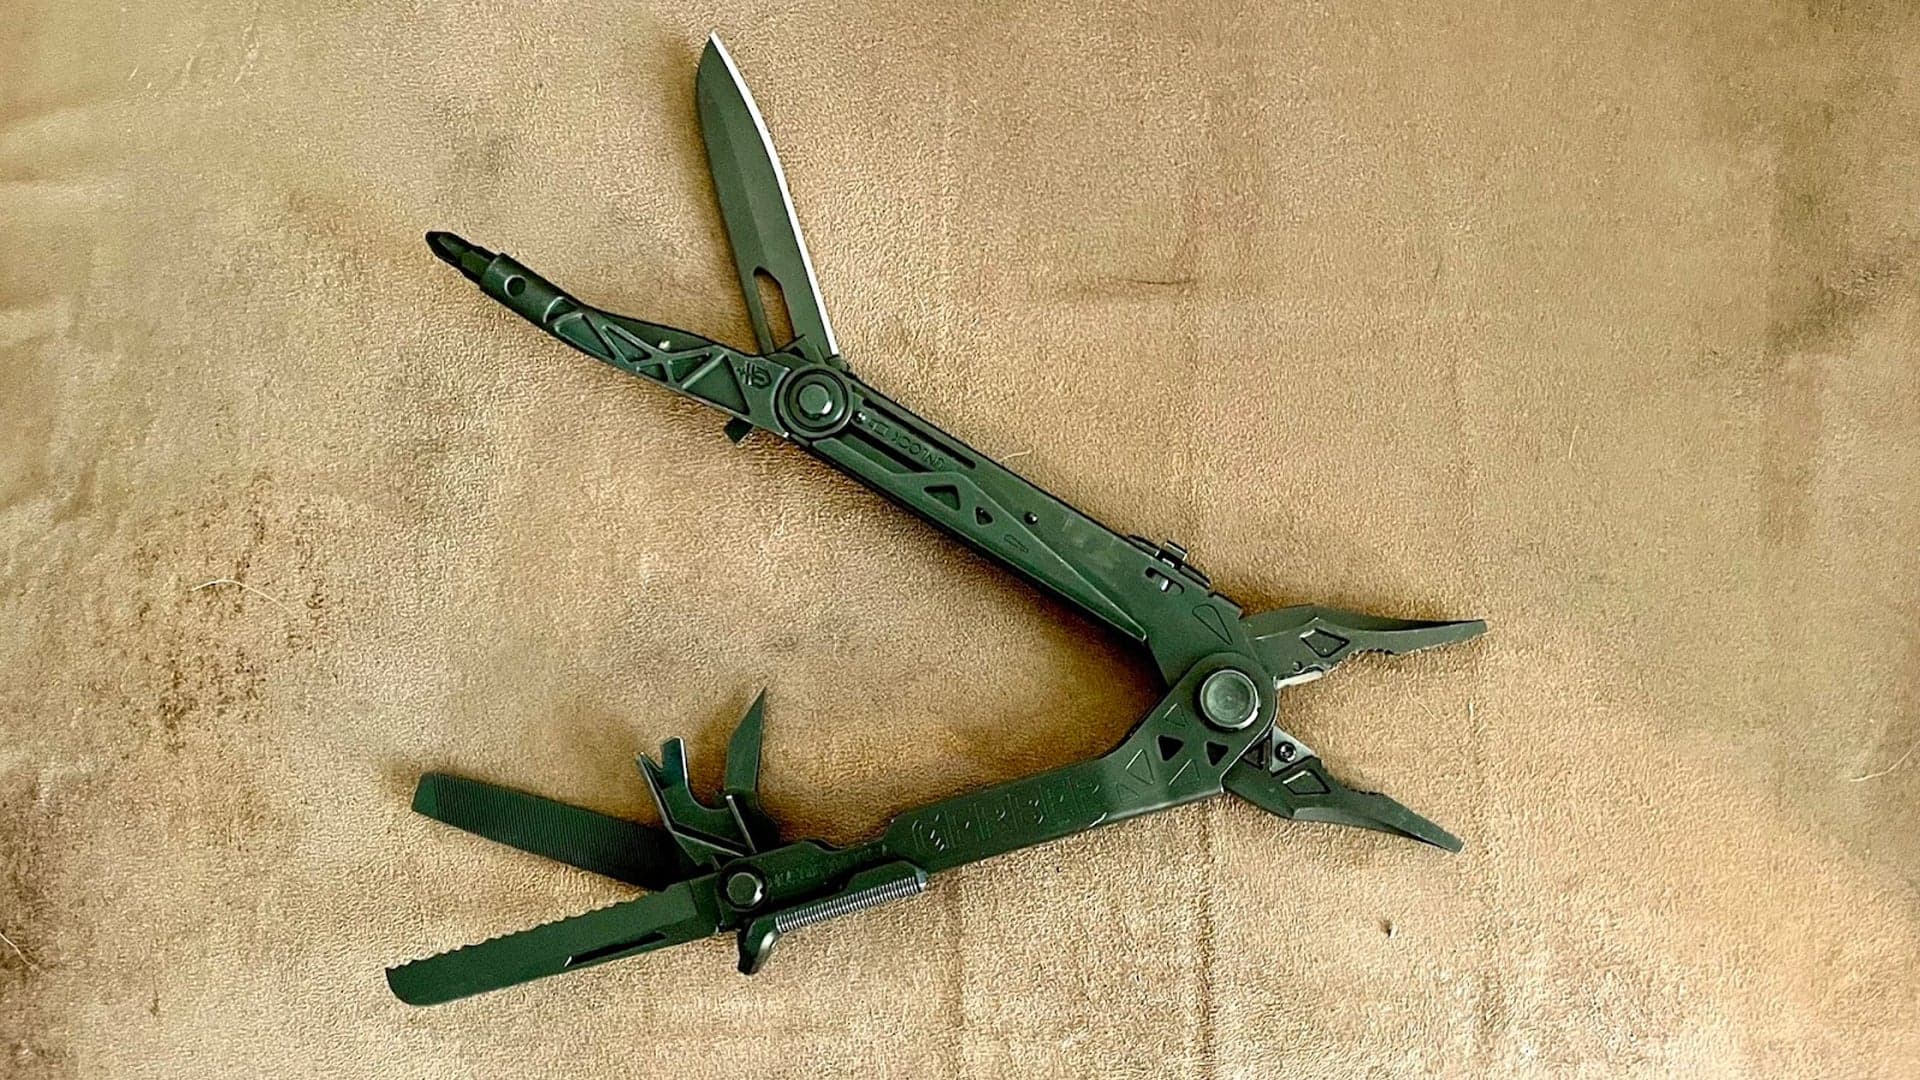 The Gerber Center-Drive Multi-Tool Is Too Big to Be Your EDC